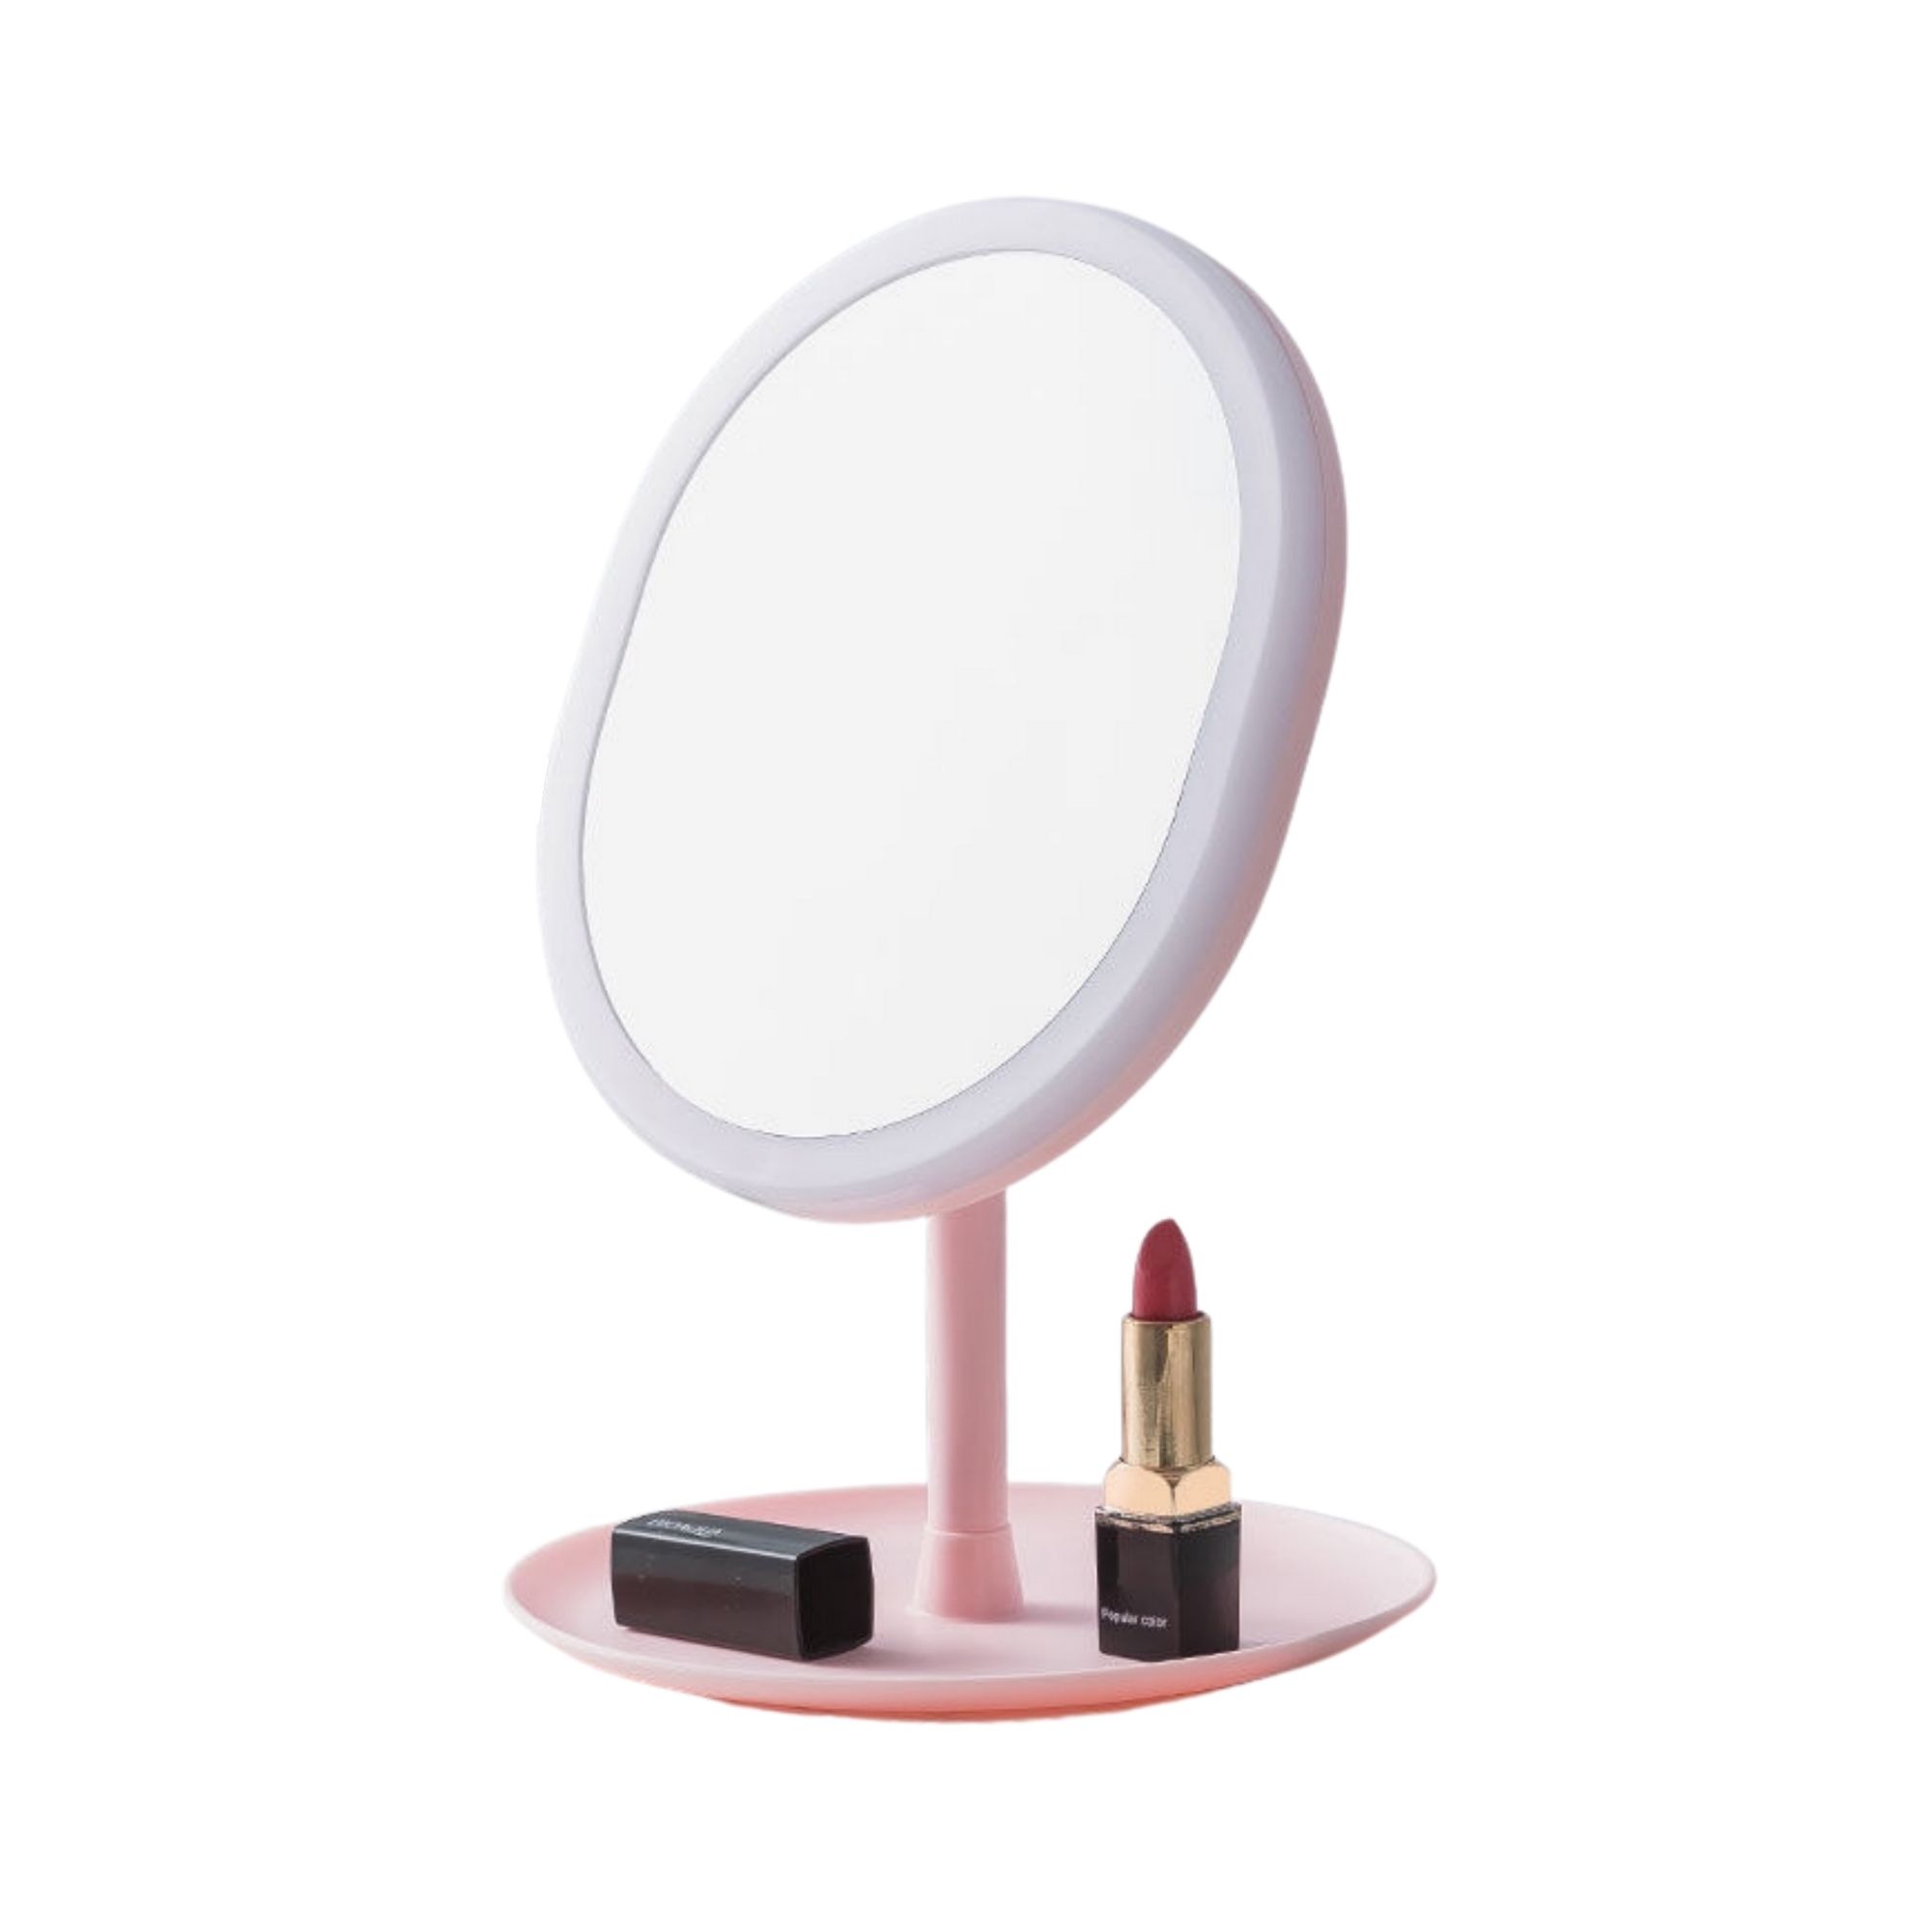 Ready Stock WD-002 3 Mode LED Light Hollywood Dressing Circle Makeup Mirror Portable USB Charge Mirror Bulbs Makeup